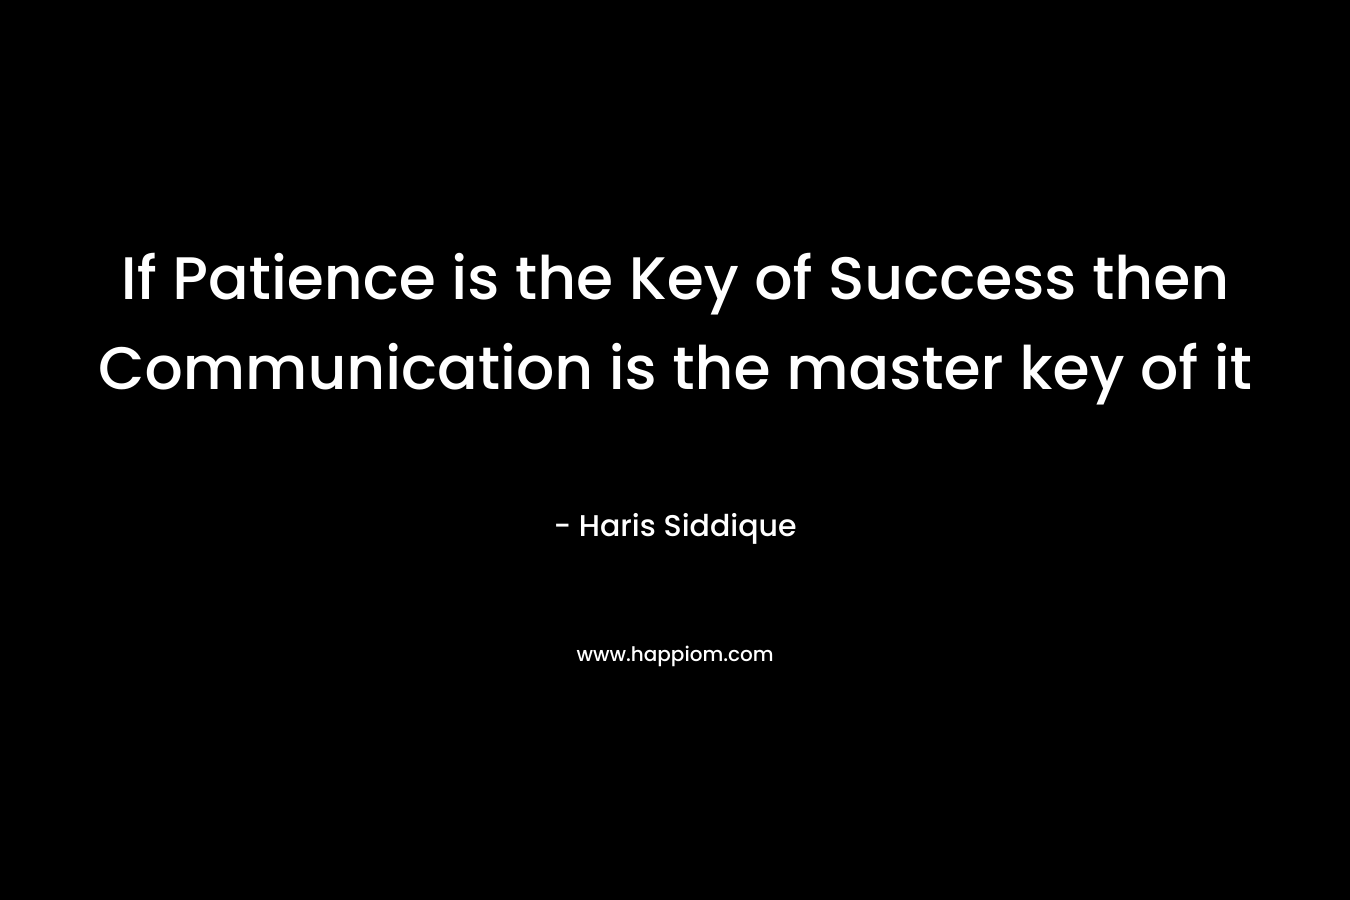 If Patience is the Key of Success then Communication is the master key of it – Haris Siddique